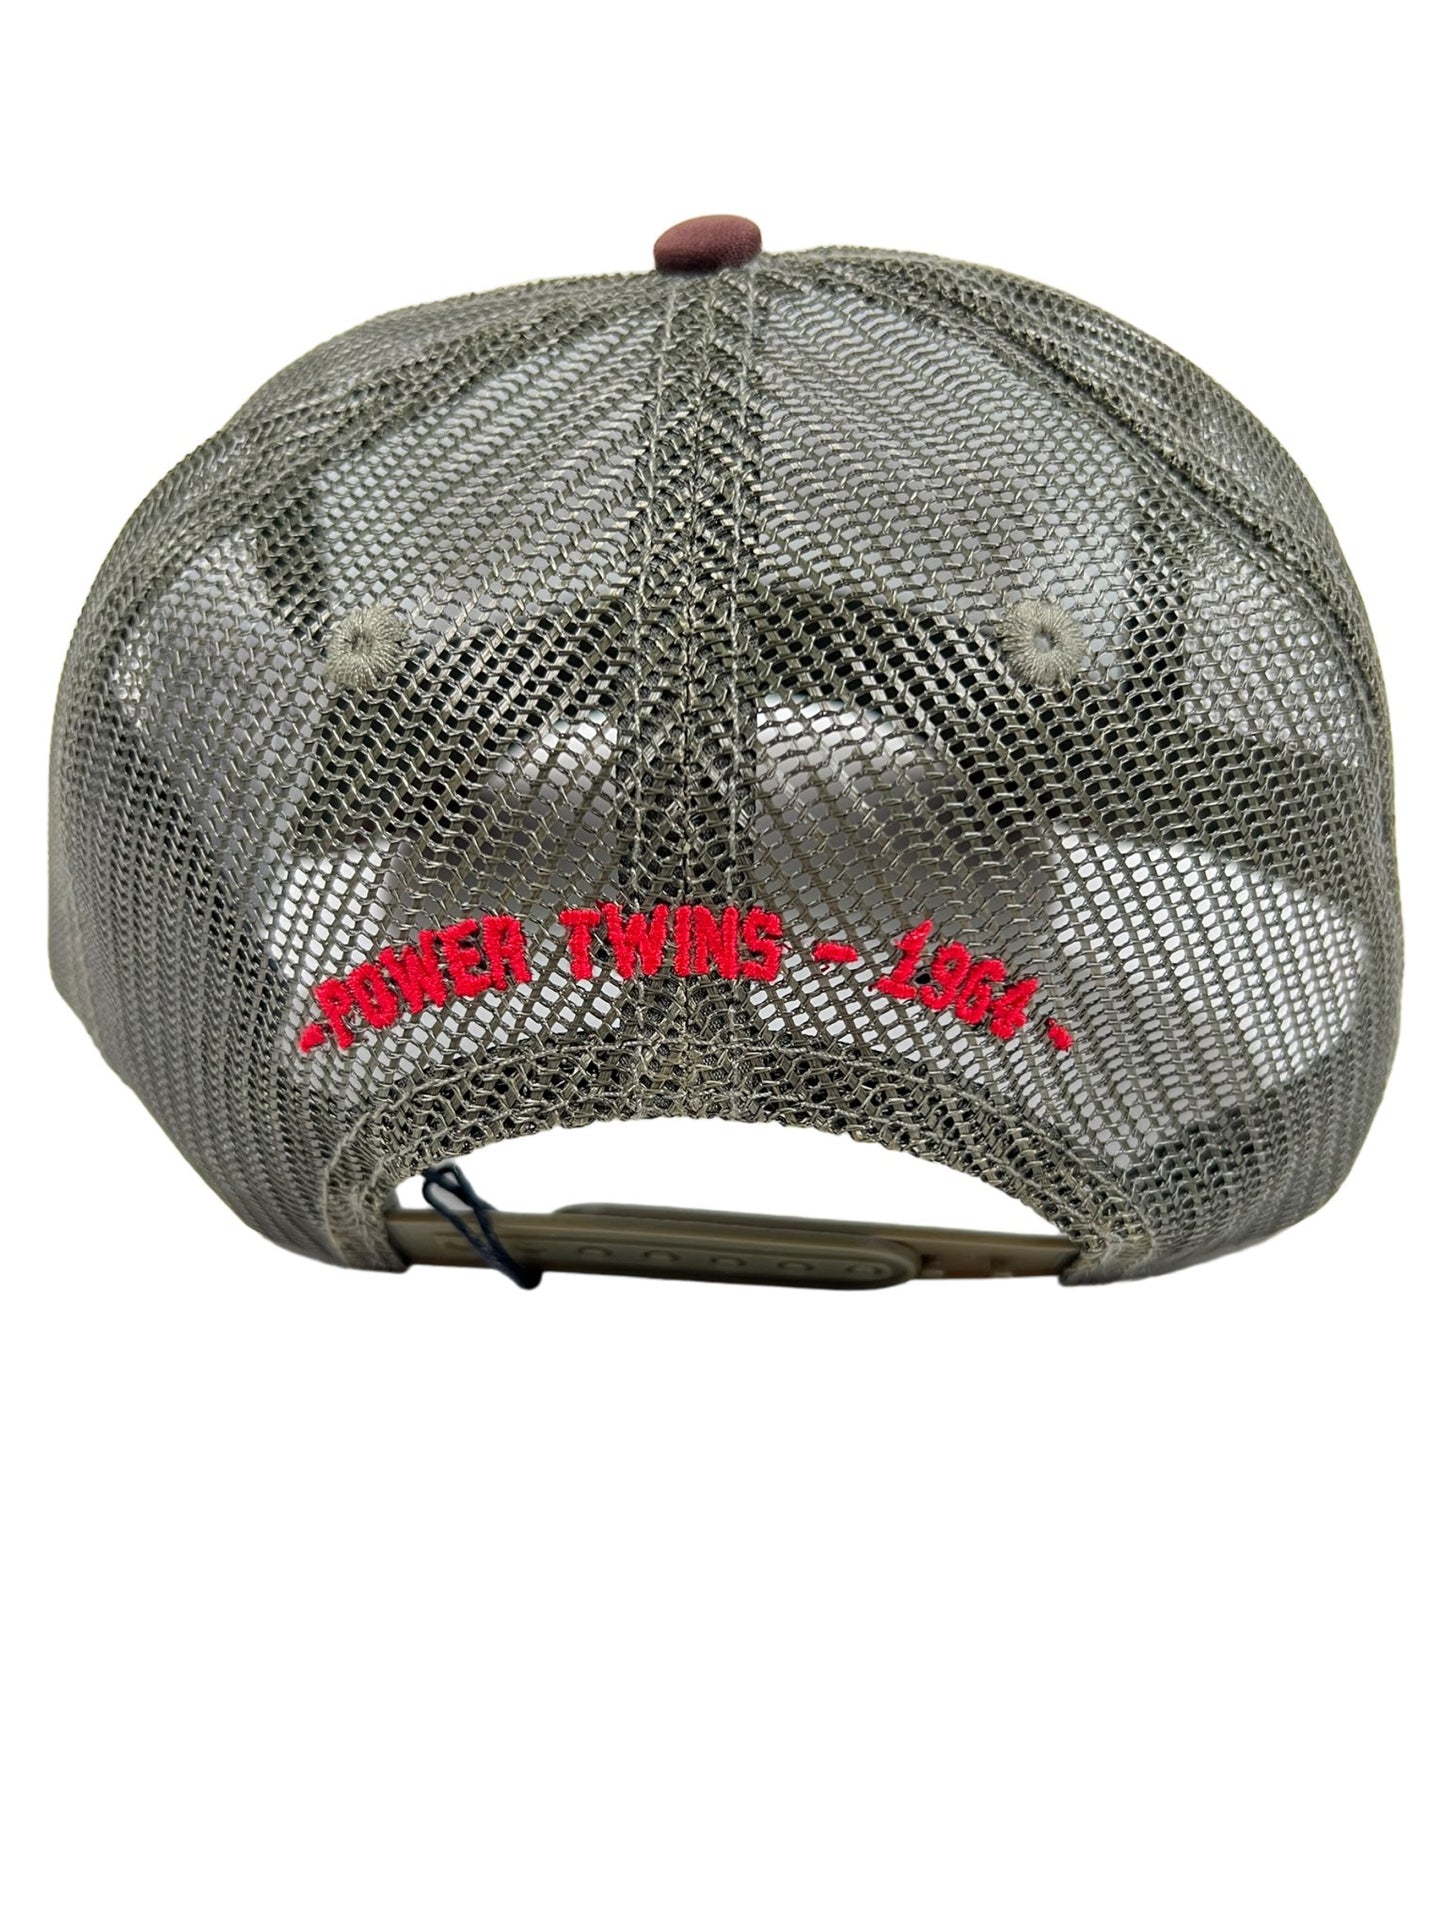 A green mesh DSQUARED2 baseball cap with red writing on it.